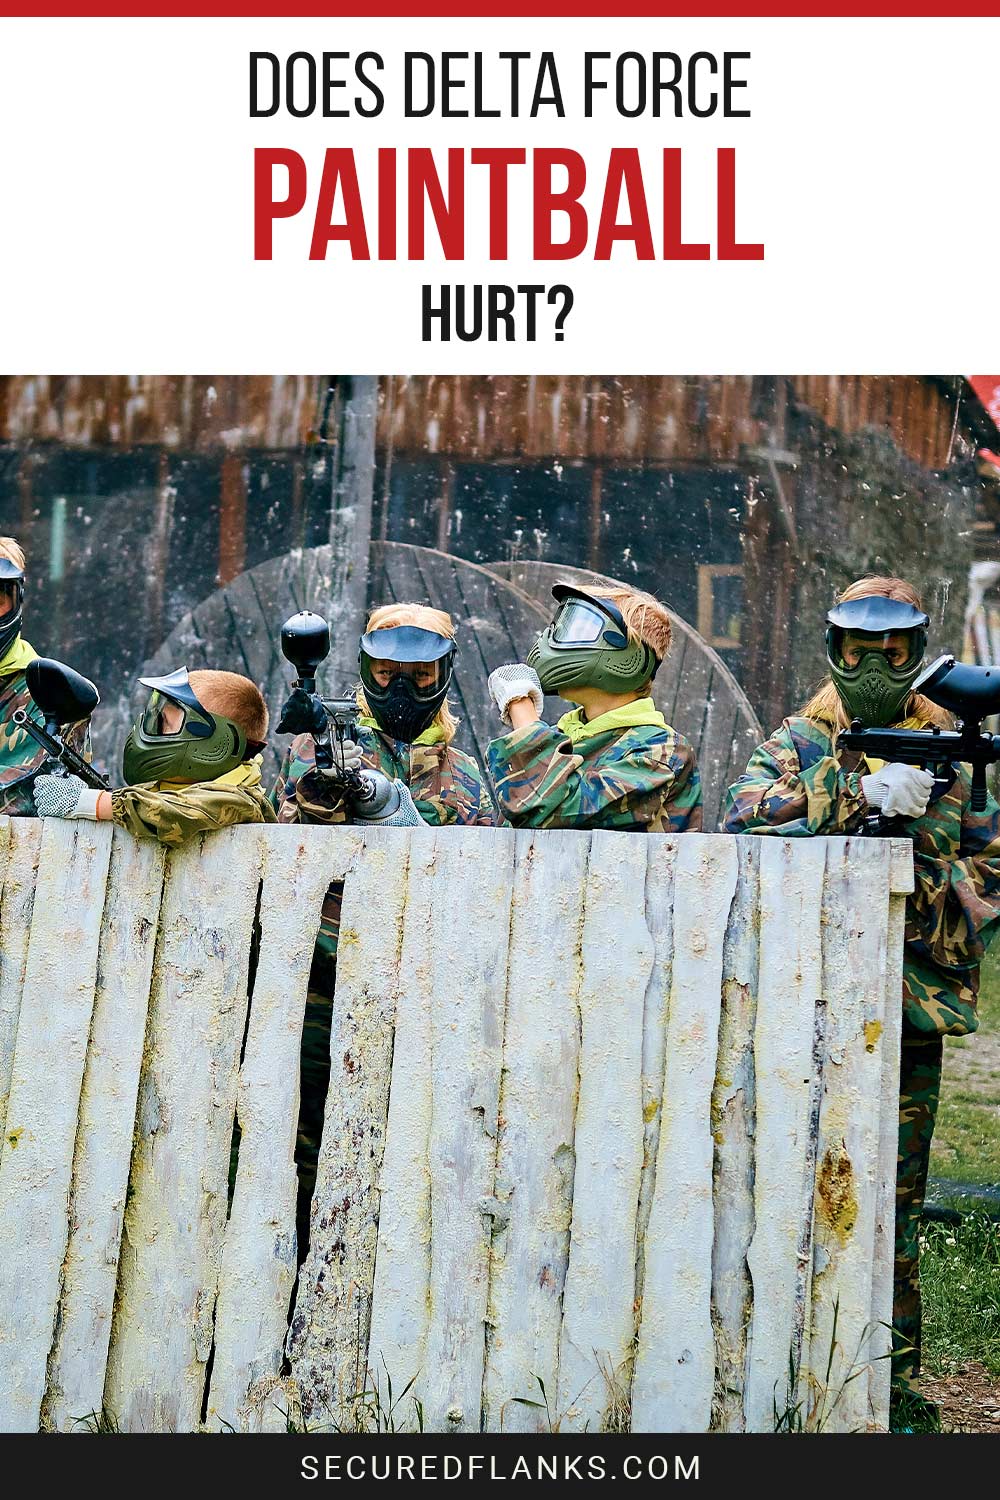 People wearing paintball gears behind a big wooden fence - Does Delta Force Paintball Hurt?